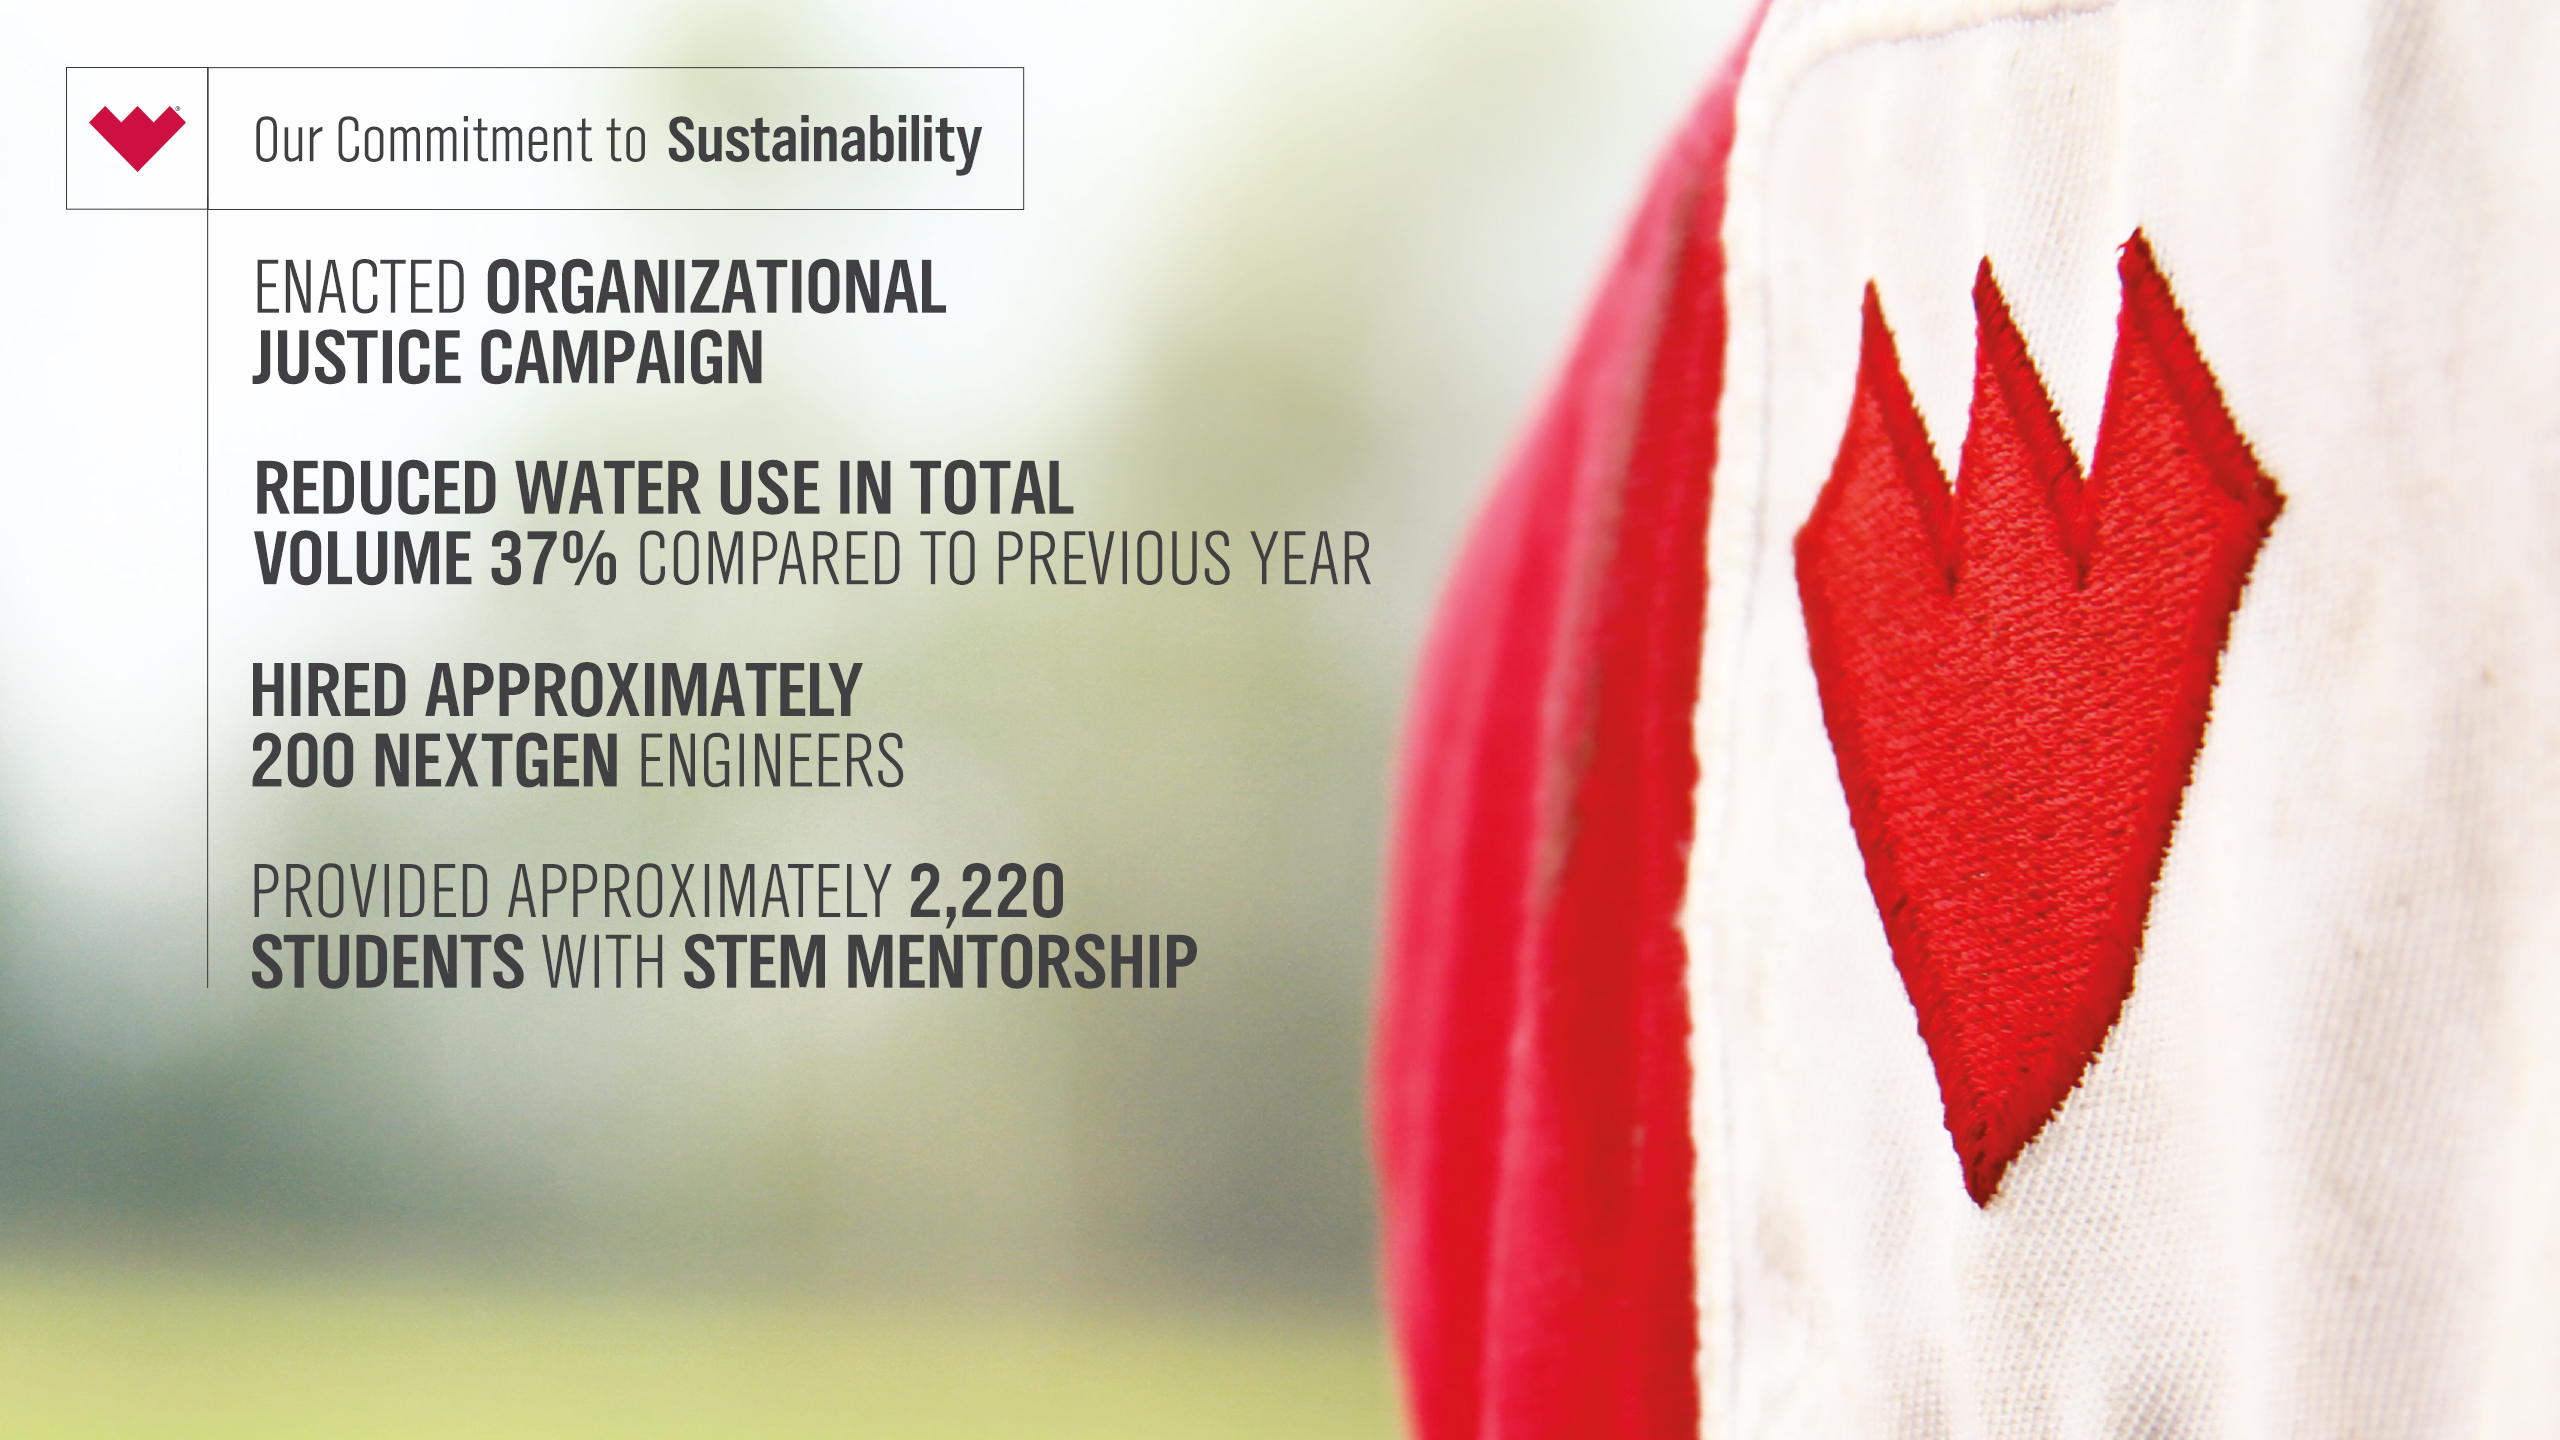 Our Sustainability